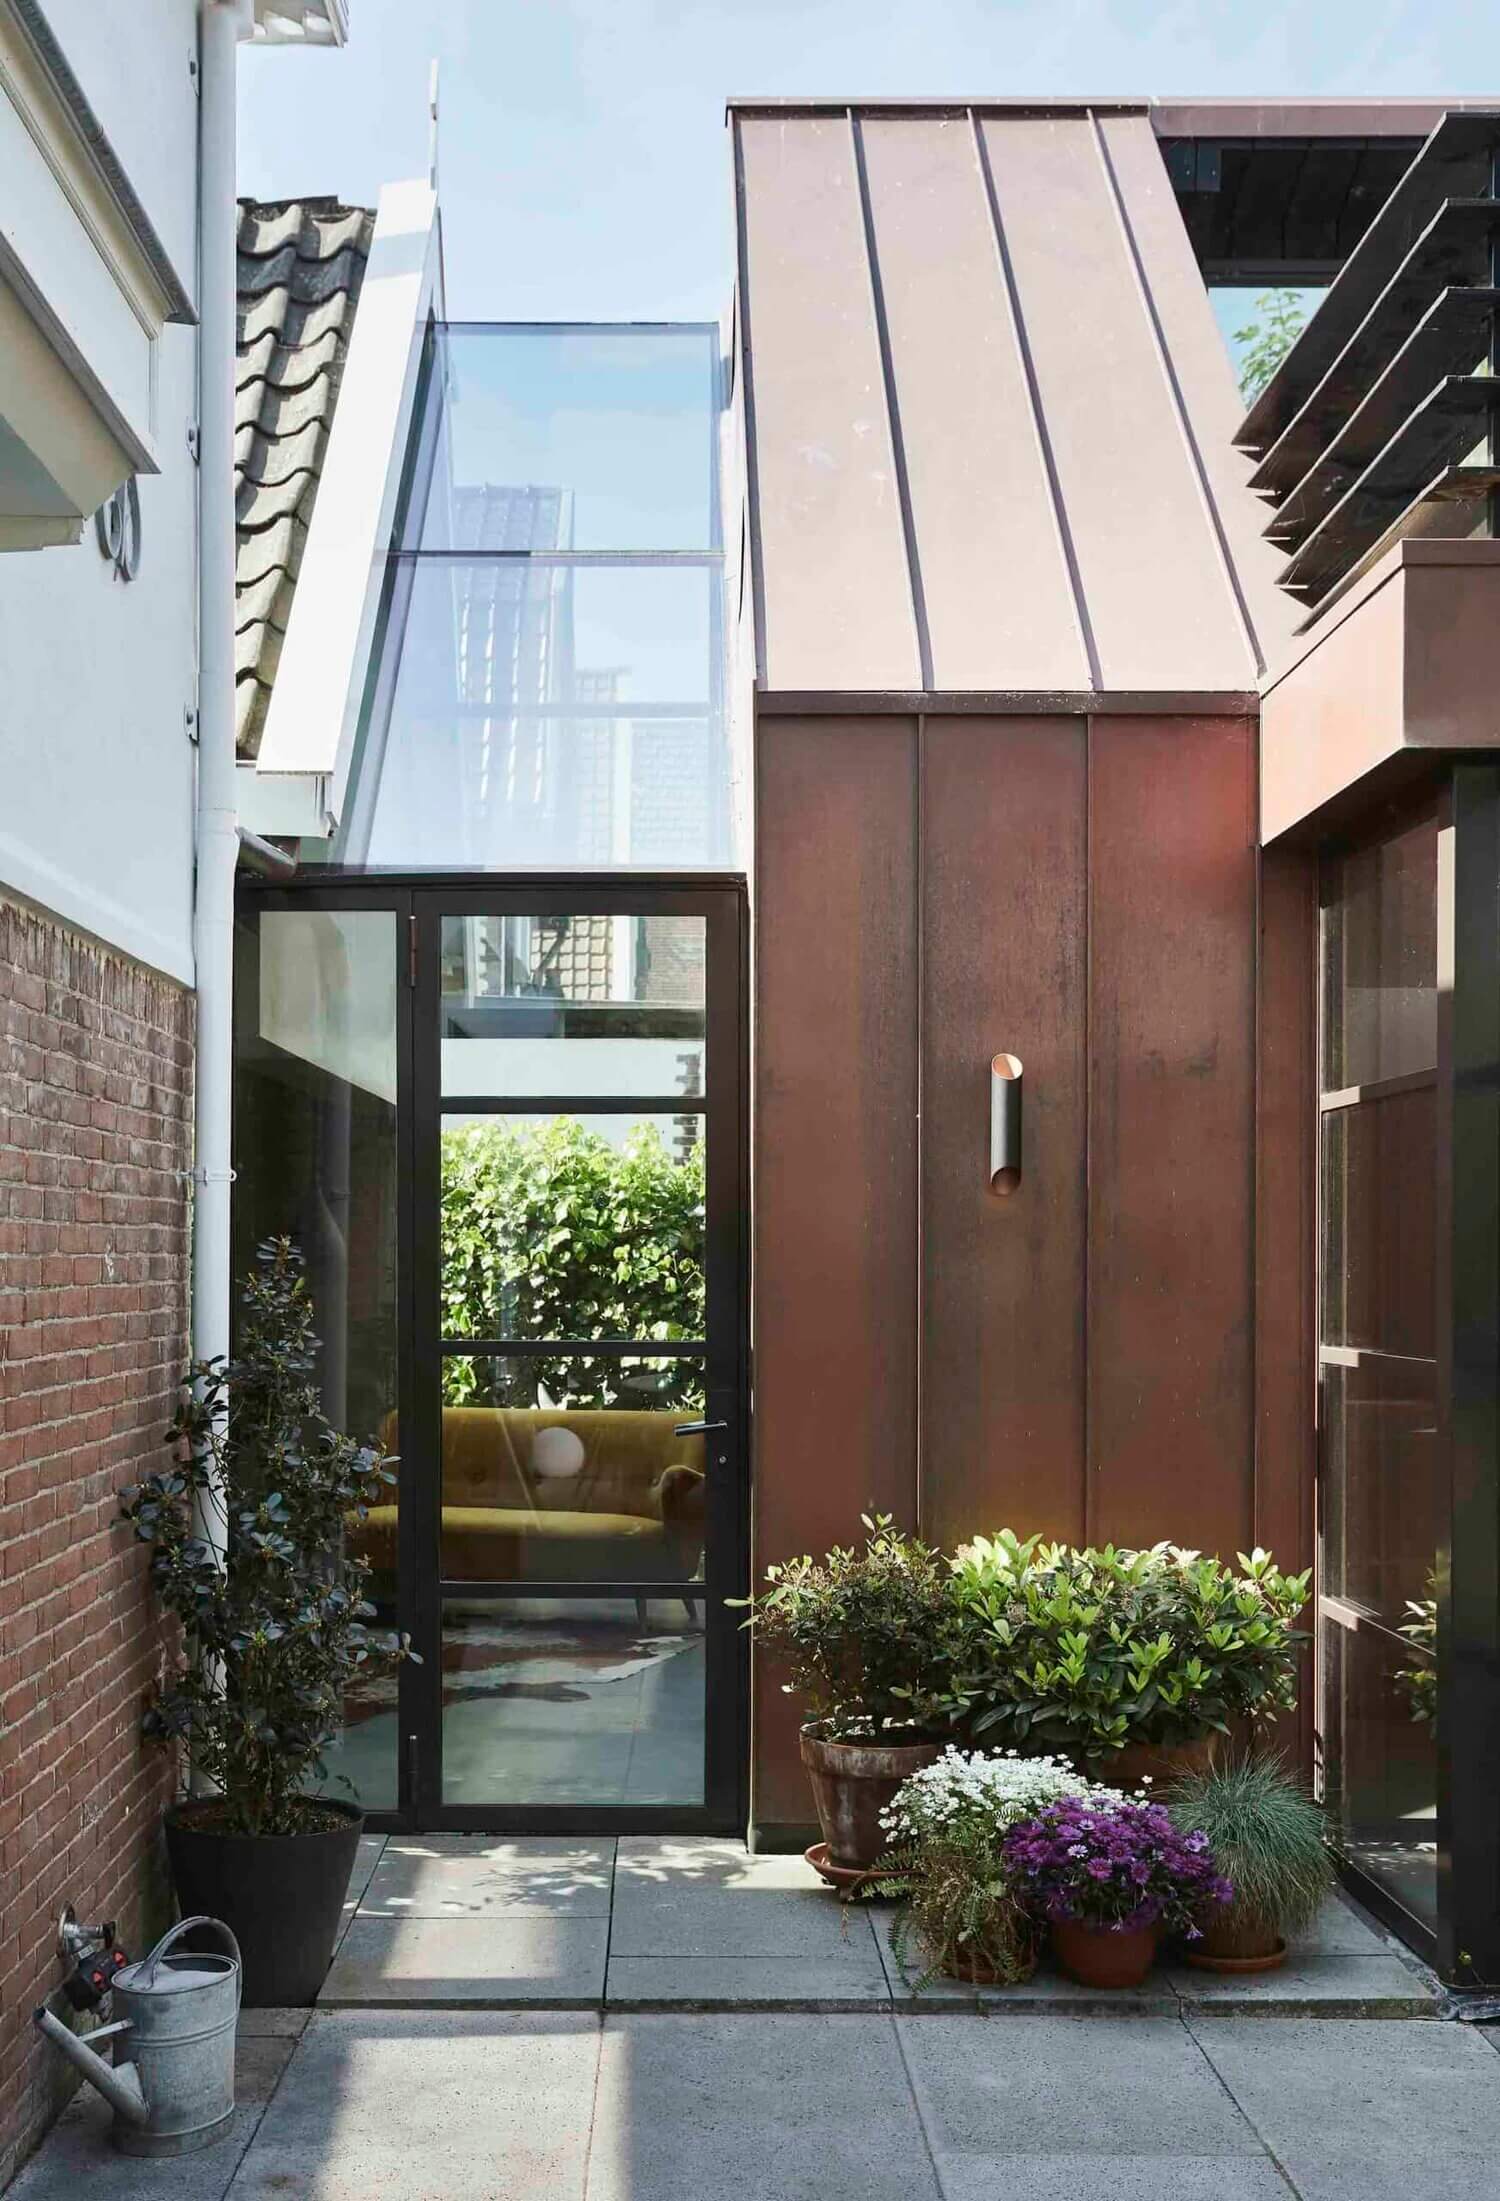 ACharacteristicDesignVillawithCarriageHouseinTheNetherlands TheNordroom30 A Characteristic Design Villa with Carriage House in The Netherlands